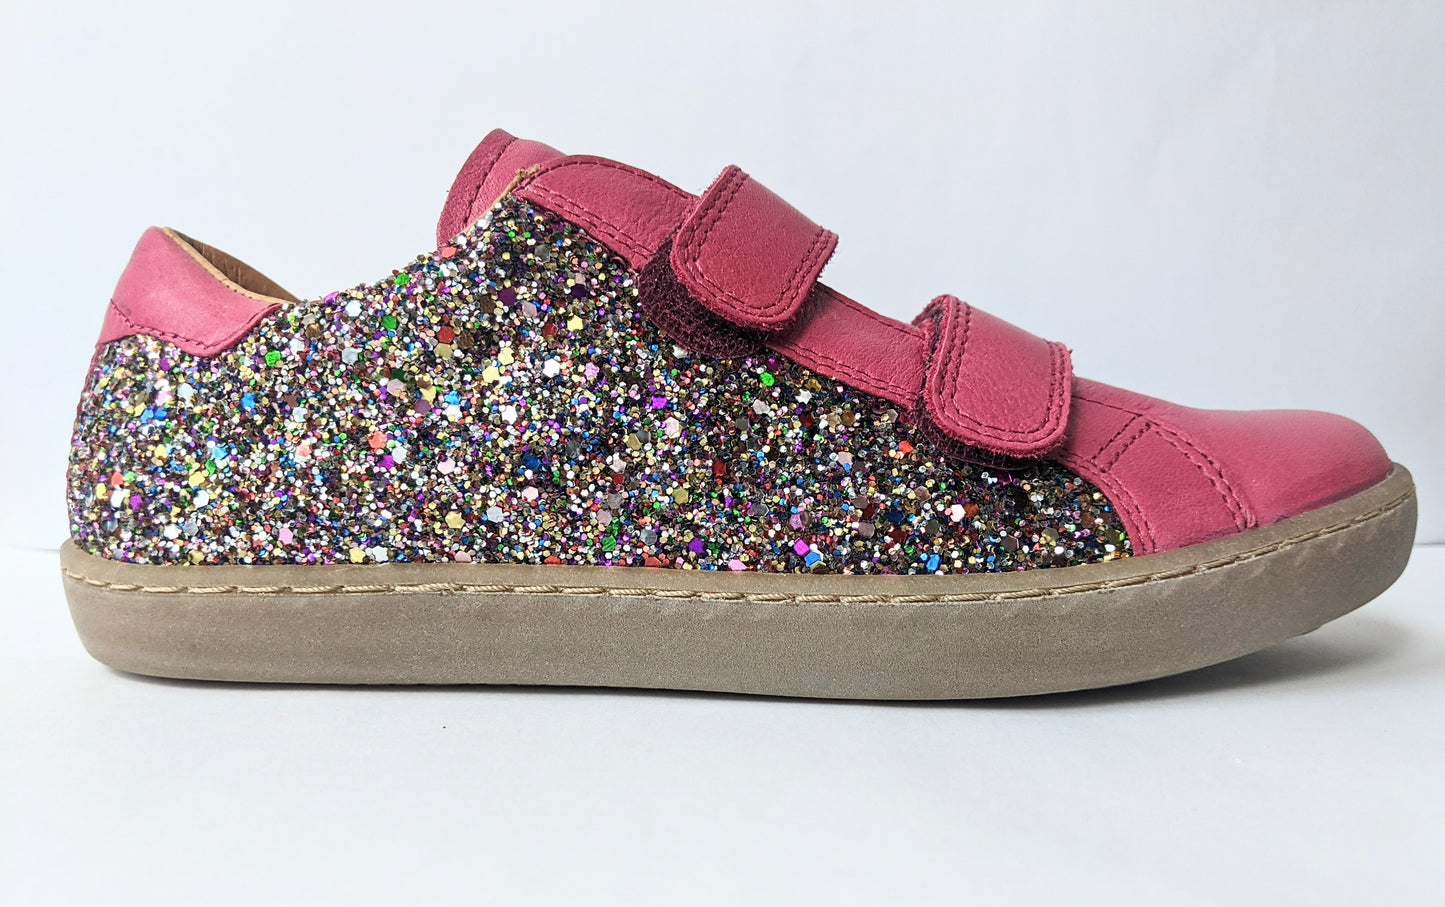 A girls casual shoe by Froddo, style G3130094-6 in Fuchsia leather and glitter with velcro fastening. Right side view.